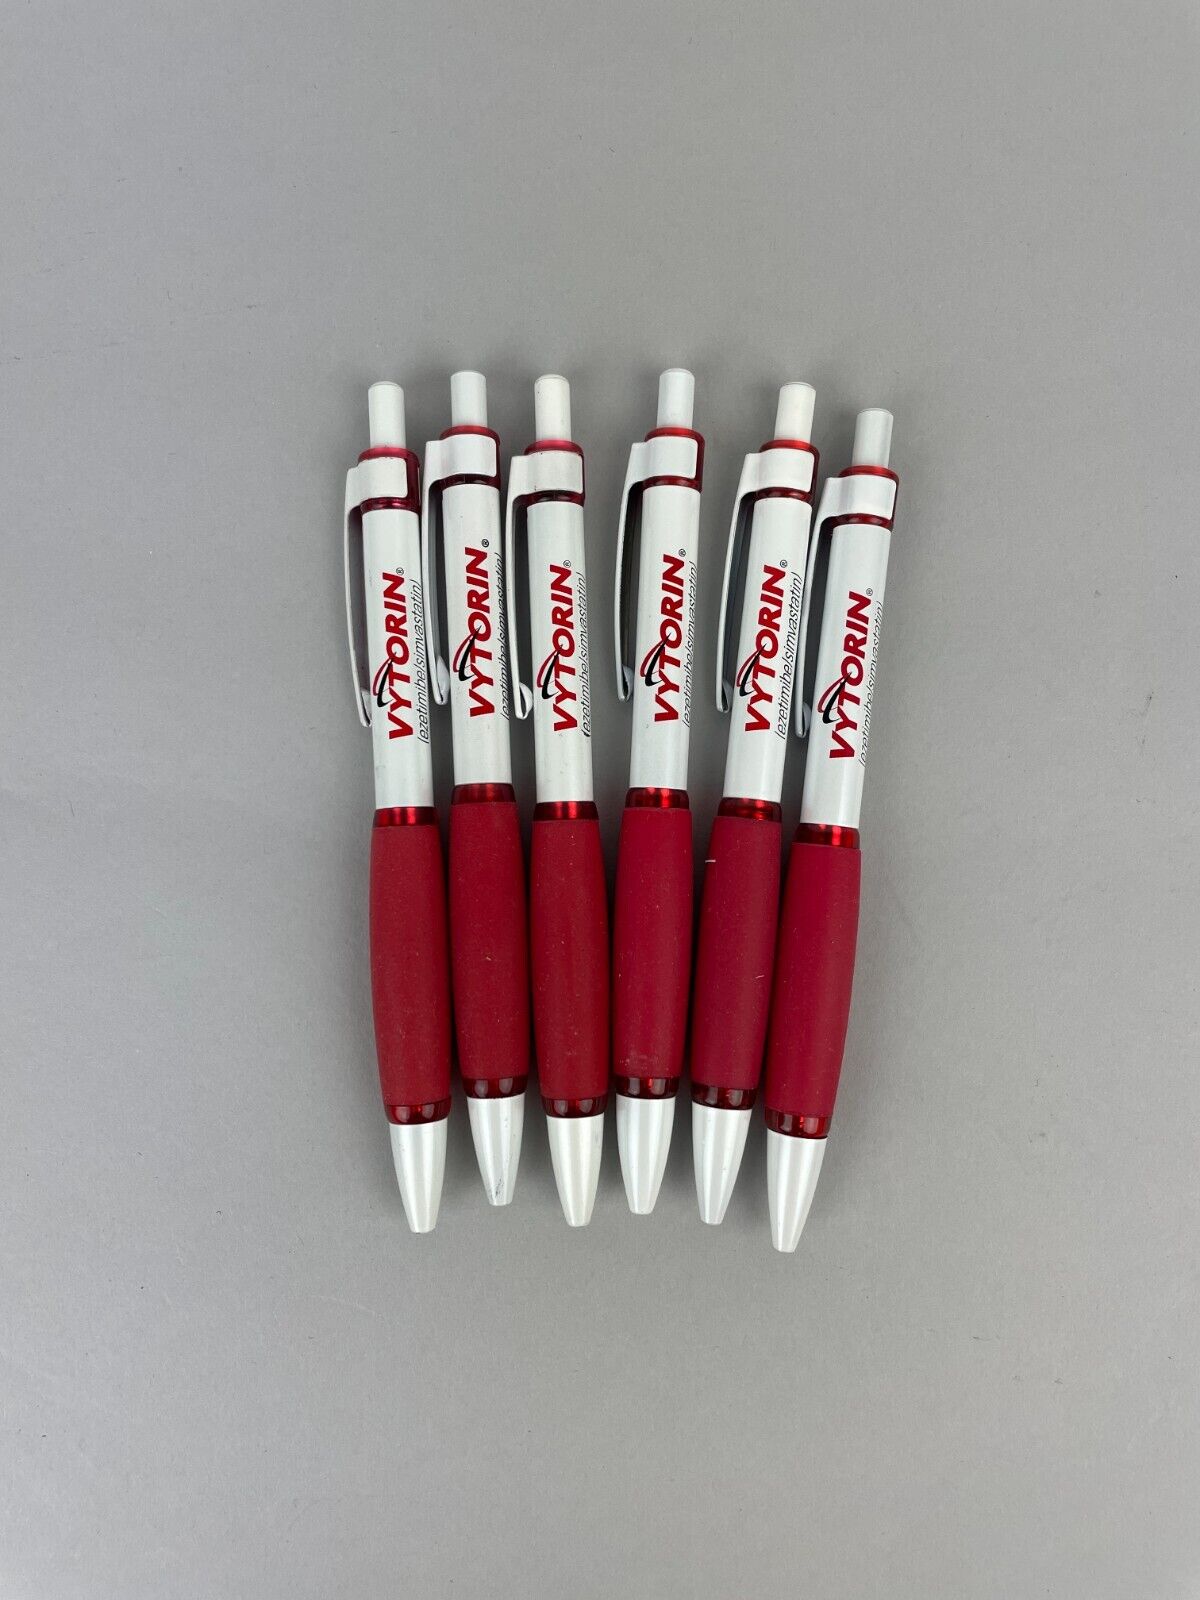 Lot 6 Vytorin Drug Rep Pens Pearl White Red Rubber Grip Clicker Style